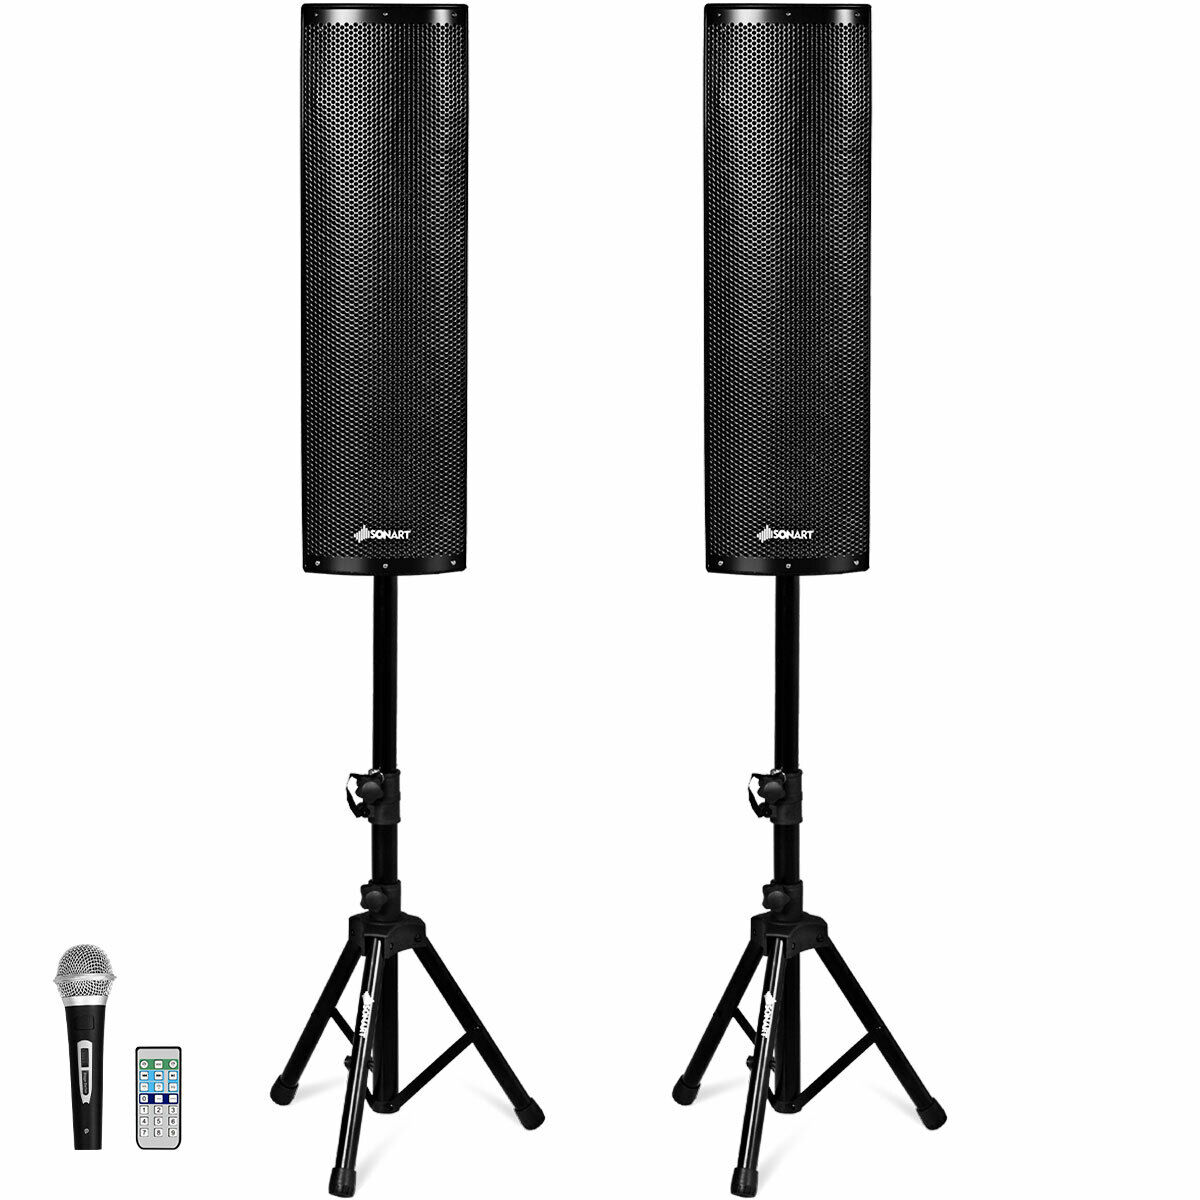 Gemini GSW-T1500PK Portable Bluetooth Outdoor Party System with